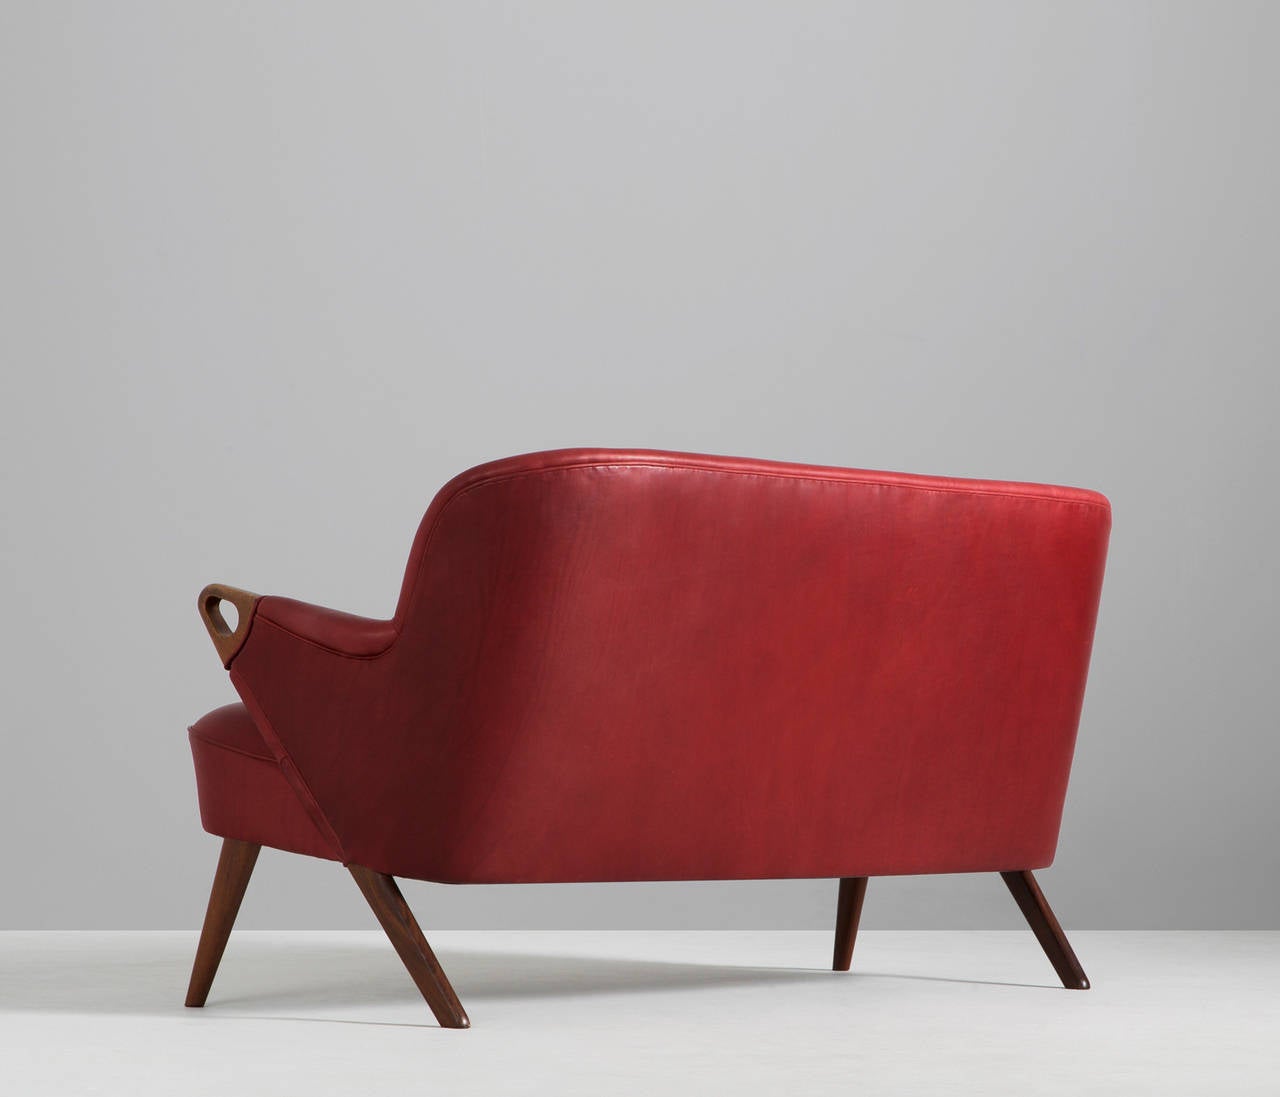 Woodwork Danish Designed Sofa Reupholstered in Red Leather